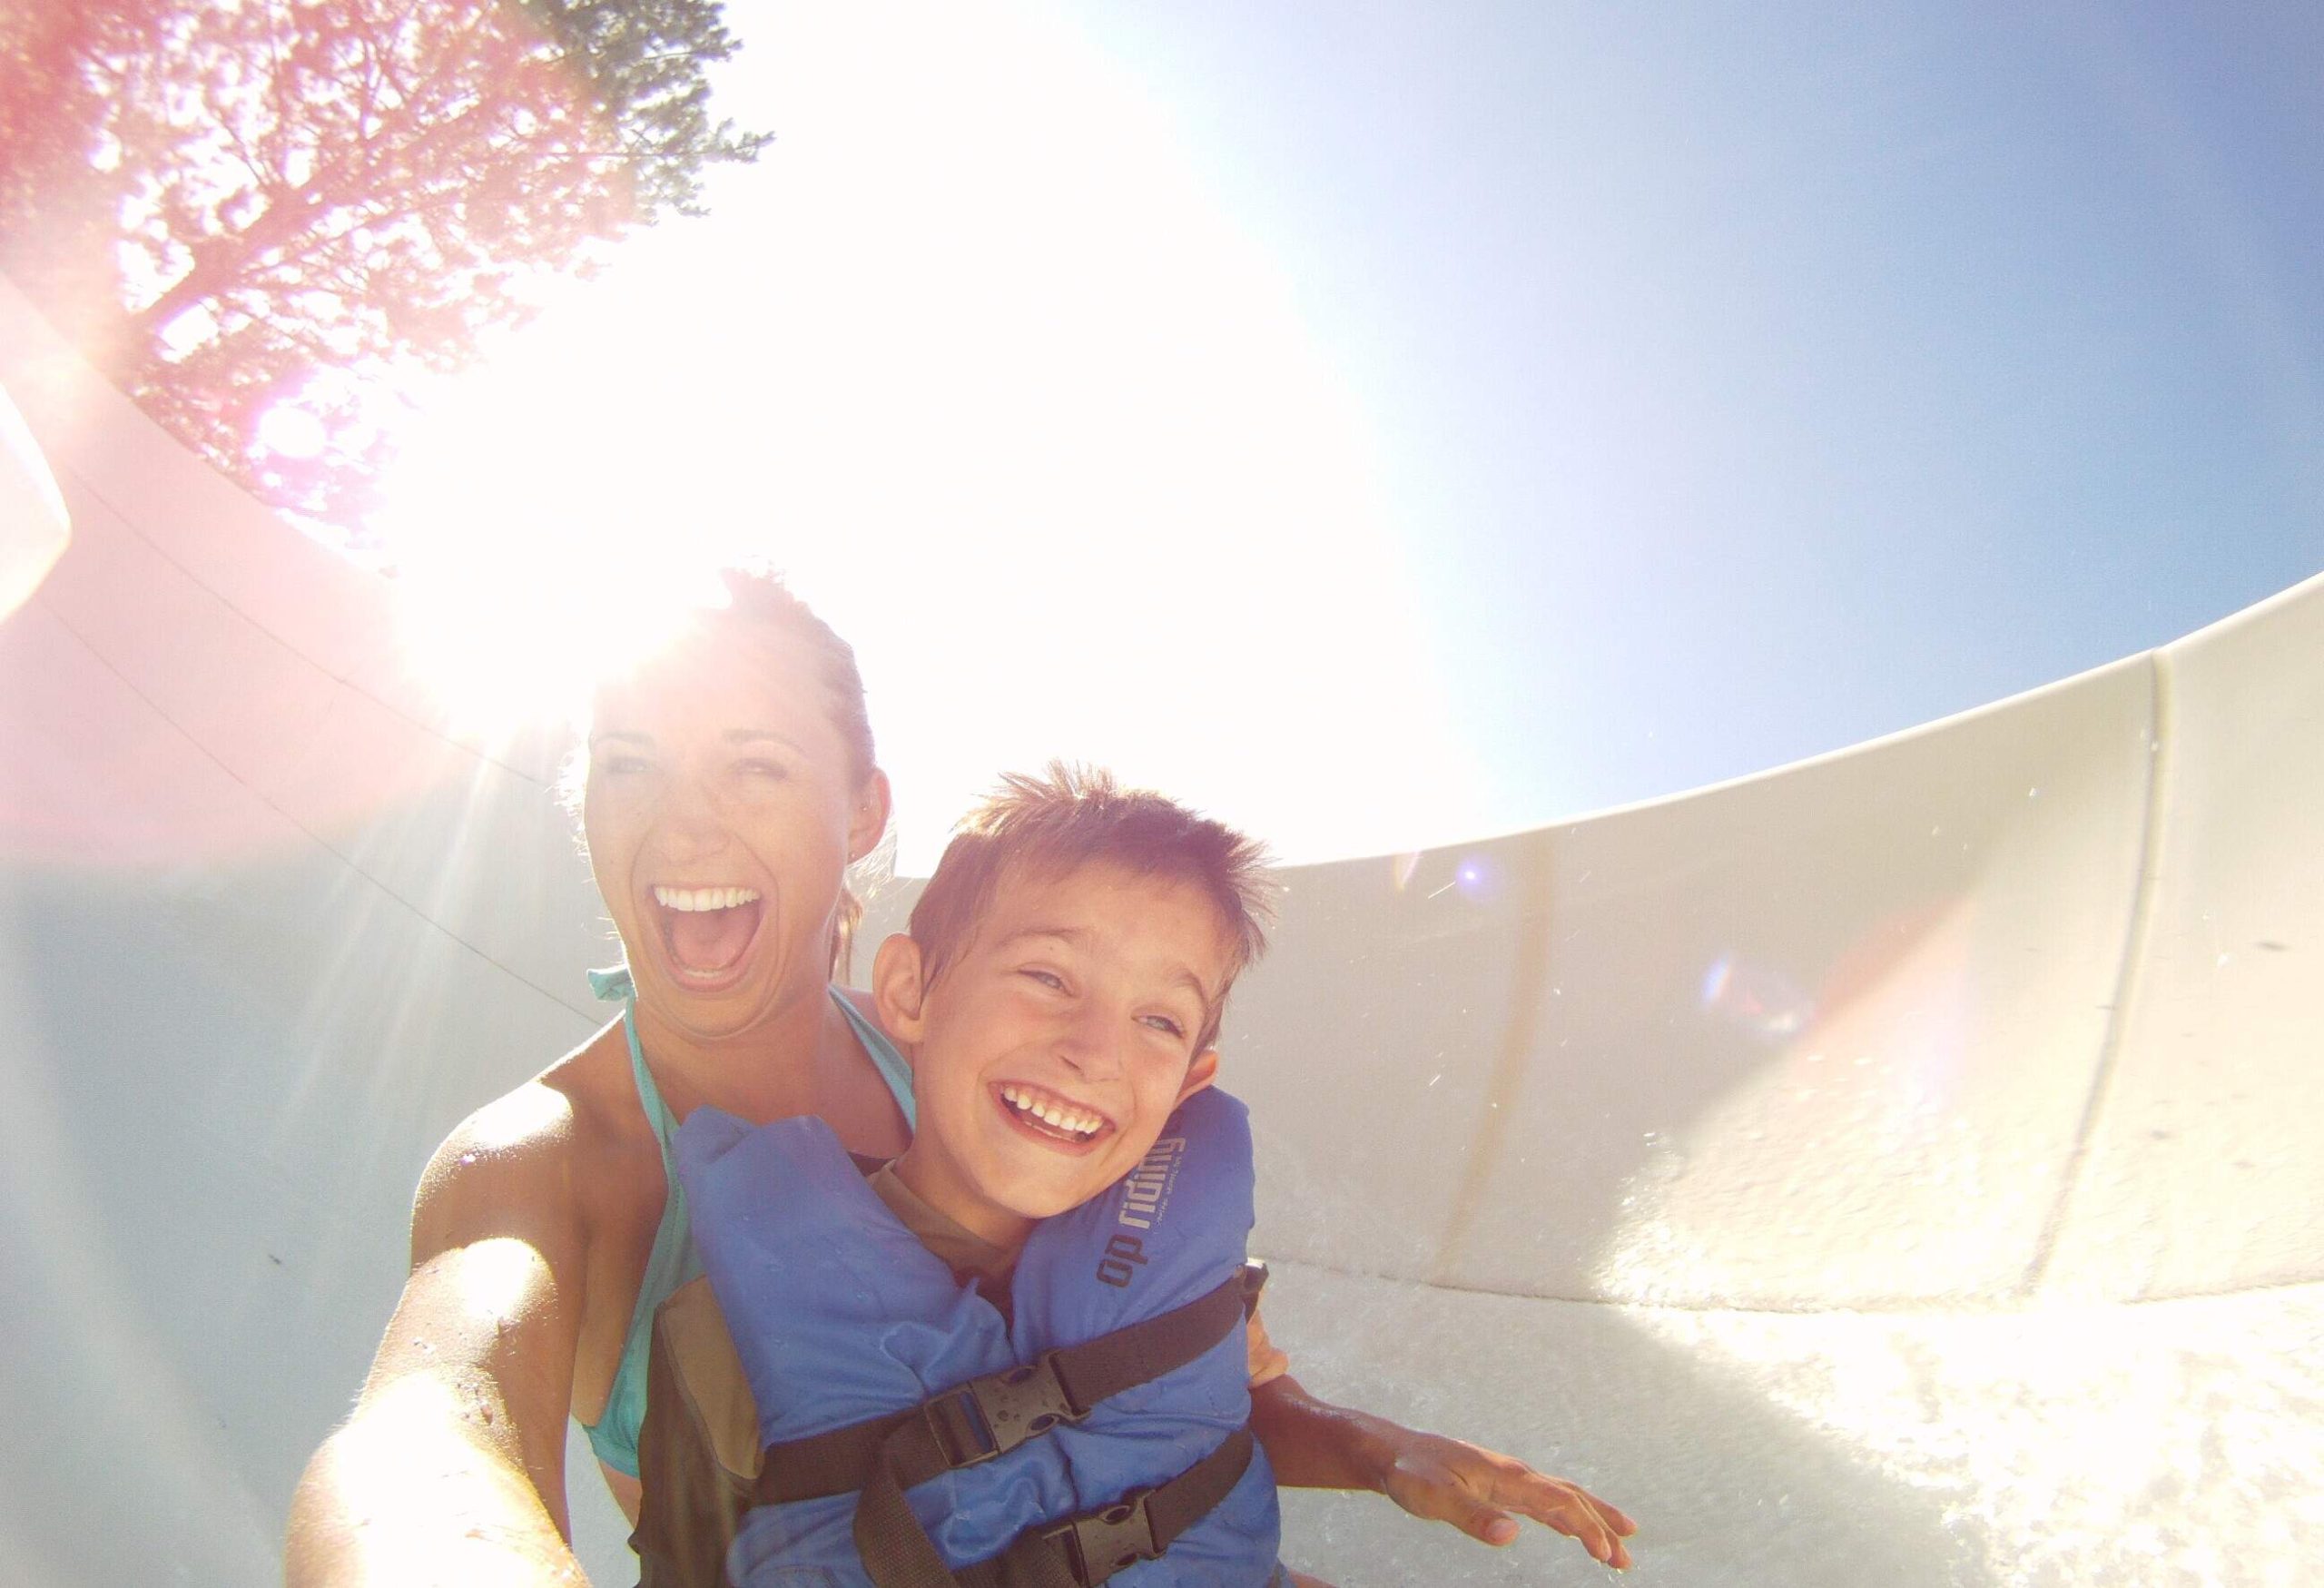 A woman with a kid wearing a life jacket smile as they slide down a water slide.